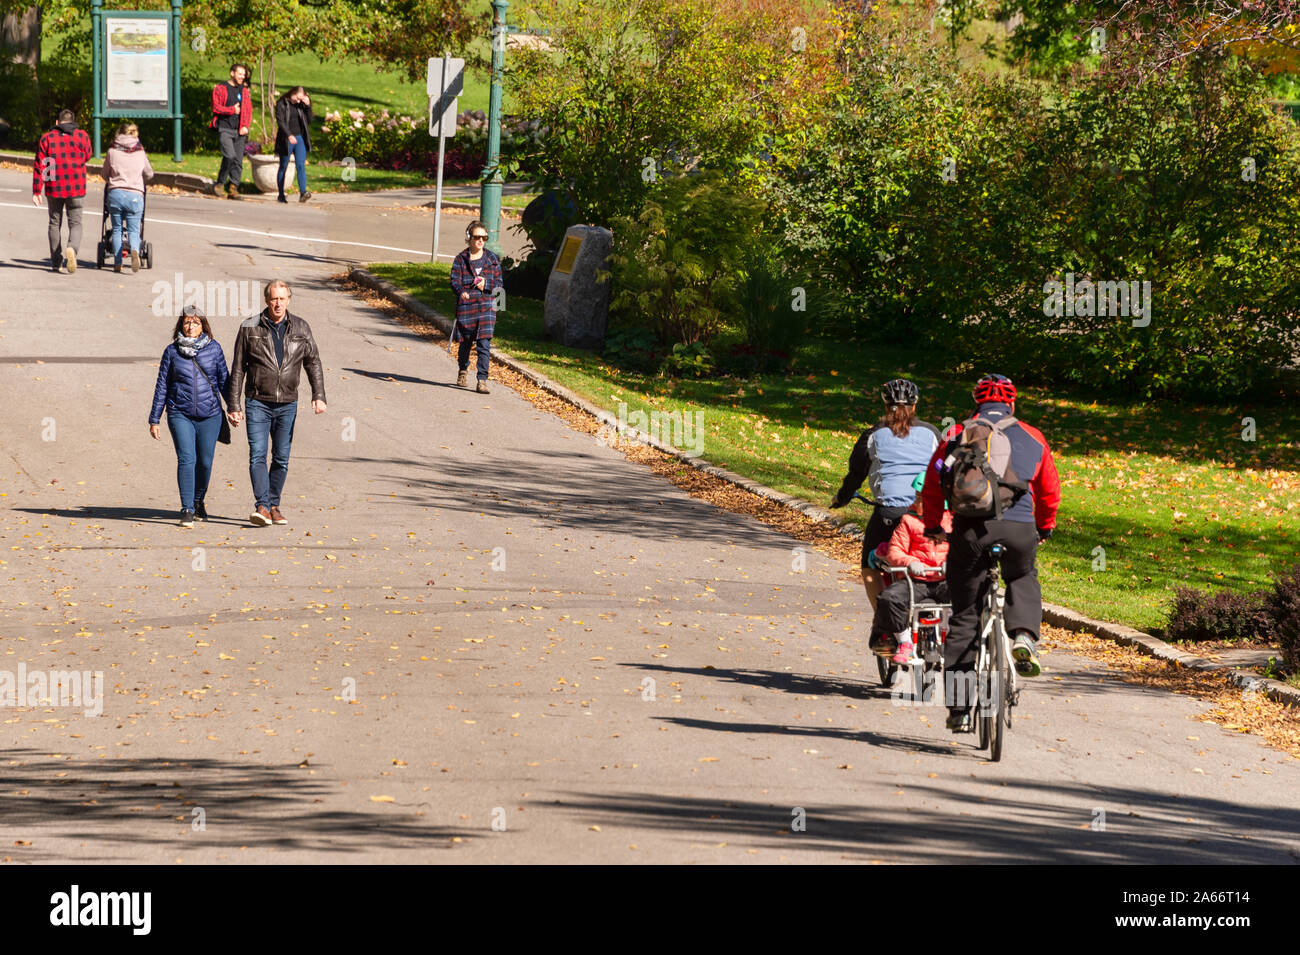 Quebec City, CA - 5 October 2019 - People walking in the Battlefields Park in the Autumn season Stock Photo